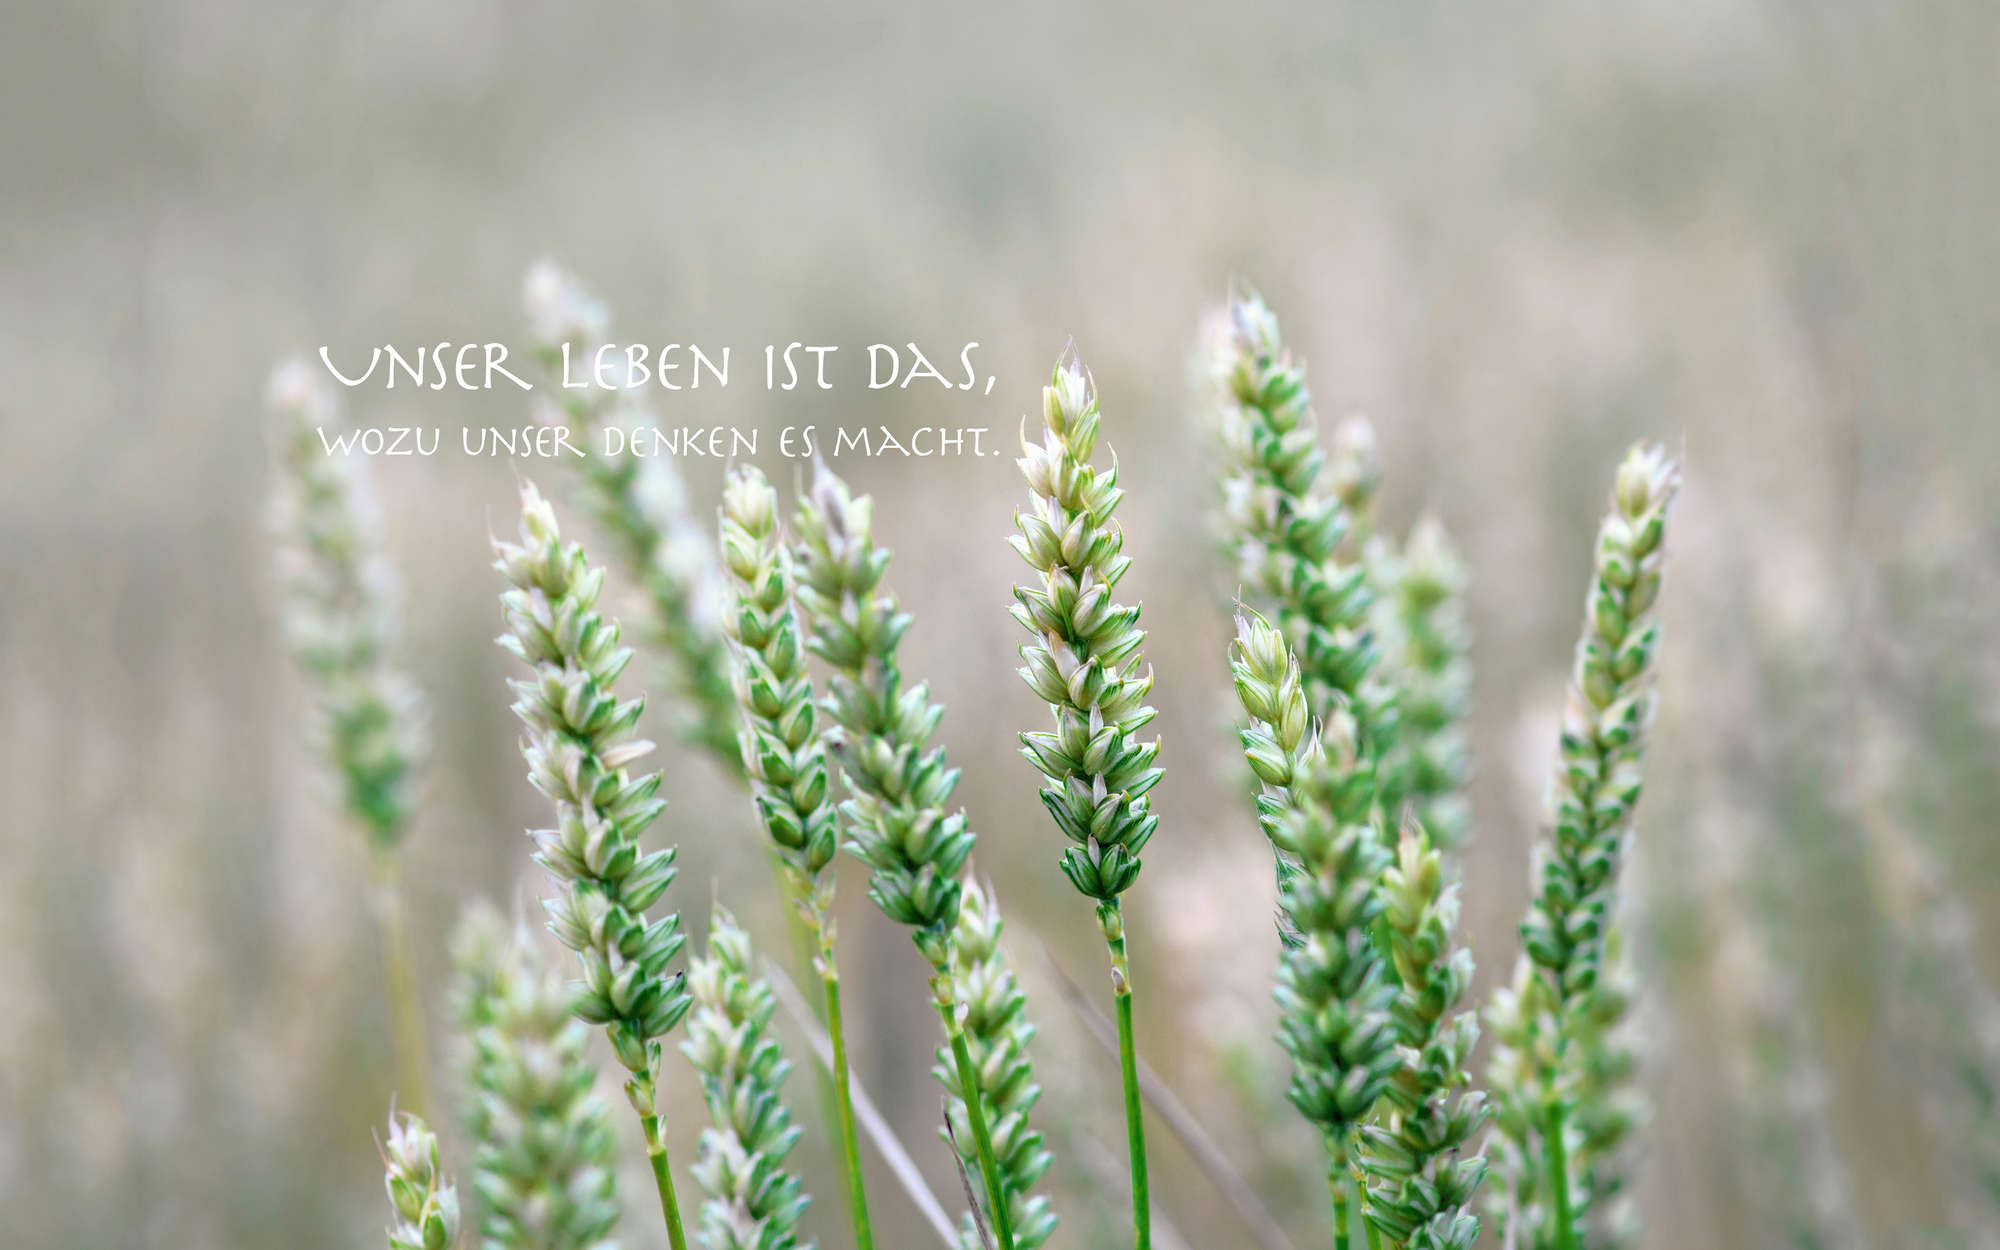             Photo wallpaper detail of wheat with lettering - textured non-woven
        